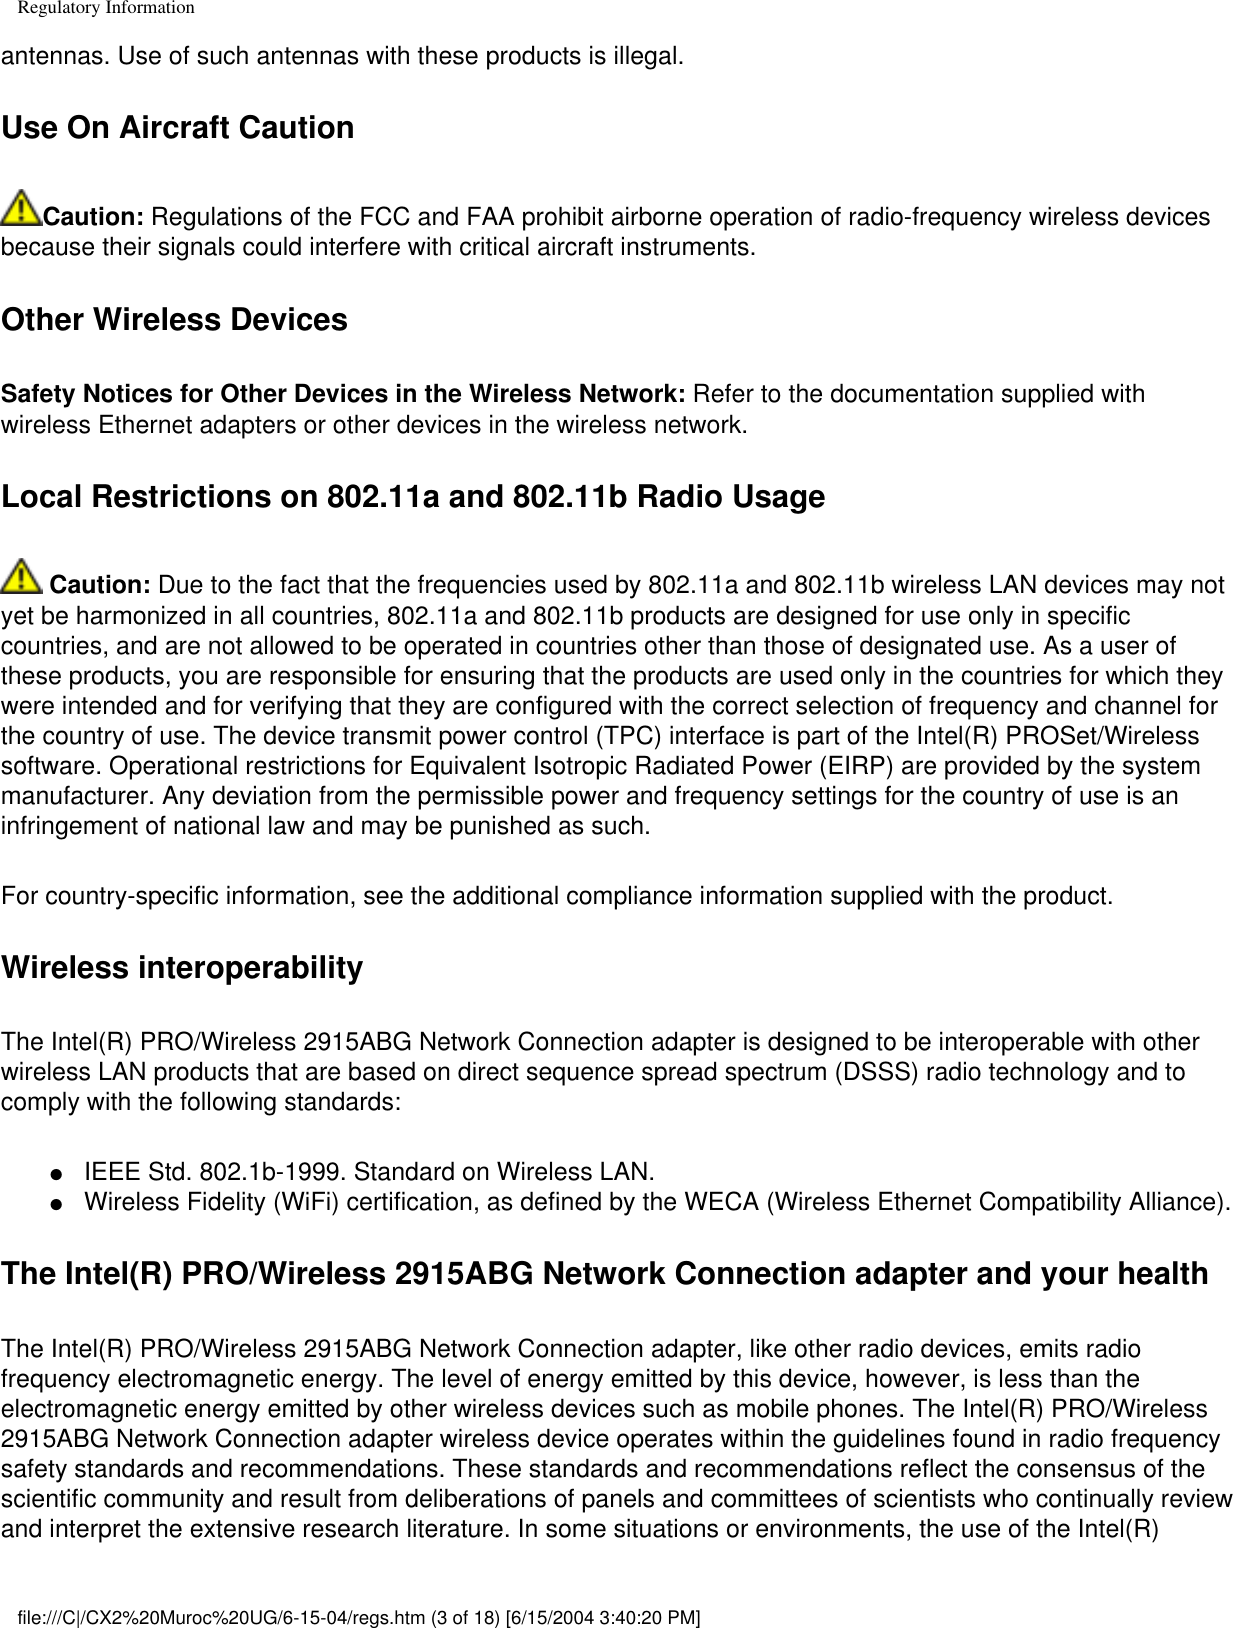 Regulatory Informationantennas. Use of such antennas with these products is illegal.Use On Aircraft CautionCaution: Regulations of the FCC and FAA prohibit airborne operation of radio-frequency wireless devices because their signals could interfere with critical aircraft instruments.Other Wireless DevicesSafety Notices for Other Devices in the Wireless Network: Refer to the documentation supplied with wireless Ethernet adapters or other devices in the wireless network.Local Restrictions on 802.11a and 802.11b Radio Usage Caution: Due to the fact that the frequencies used by 802.11a and 802.11b wireless LAN devices may not yet be harmonized in all countries, 802.11a and 802.11b products are designed for use only in specific countries, and are not allowed to be operated in countries other than those of designated use. As a user of these products, you are responsible for ensuring that the products are used only in the countries for which they were intended and for verifying that they are configured with the correct selection of frequency and channel for the country of use. The device transmit power control (TPC) interface is part of the Intel(R) PROSet/Wireless software. Operational restrictions for Equivalent Isotropic Radiated Power (EIRP) are provided by the system manufacturer. Any deviation from the permissible power and frequency settings for the country of use is an infringement of national law and may be punished as such. For country-specific information, see the additional compliance information supplied with the product. Wireless interoperabilityThe Intel(R) PRO/Wireless 2915ABG Network Connection adapter is designed to be interoperable with other wireless LAN products that are based on direct sequence spread spectrum (DSSS) radio technology and to comply with the following standards:●     IEEE Std. 802.1b-1999. Standard on Wireless LAN. ●     Wireless Fidelity (WiFi) certification, as defined by the WECA (Wireless Ethernet Compatibility Alliance).The Intel(R) PRO/Wireless 2915ABG Network Connection adapter and your healthThe Intel(R) PRO/Wireless 2915ABG Network Connection adapter, like other radio devices, emits radio frequency electromagnetic energy. The level of energy emitted by this device, however, is less than the electromagnetic energy emitted by other wireless devices such as mobile phones. The Intel(R) PRO/Wireless 2915ABG Network Connection adapter wireless device operates within the guidelines found in radio frequency safety standards and recommendations. These standards and recommendations reflect the consensus of the scientific community and result from deliberations of panels and committees of scientists who continually review and interpret the extensive research literature. In some situations or environments, the use of the Intel(R) file:///C|/CX2%20Muroc%20UG/6-15-04/regs.htm (3 of 18) [6/15/2004 3:40:20 PM]